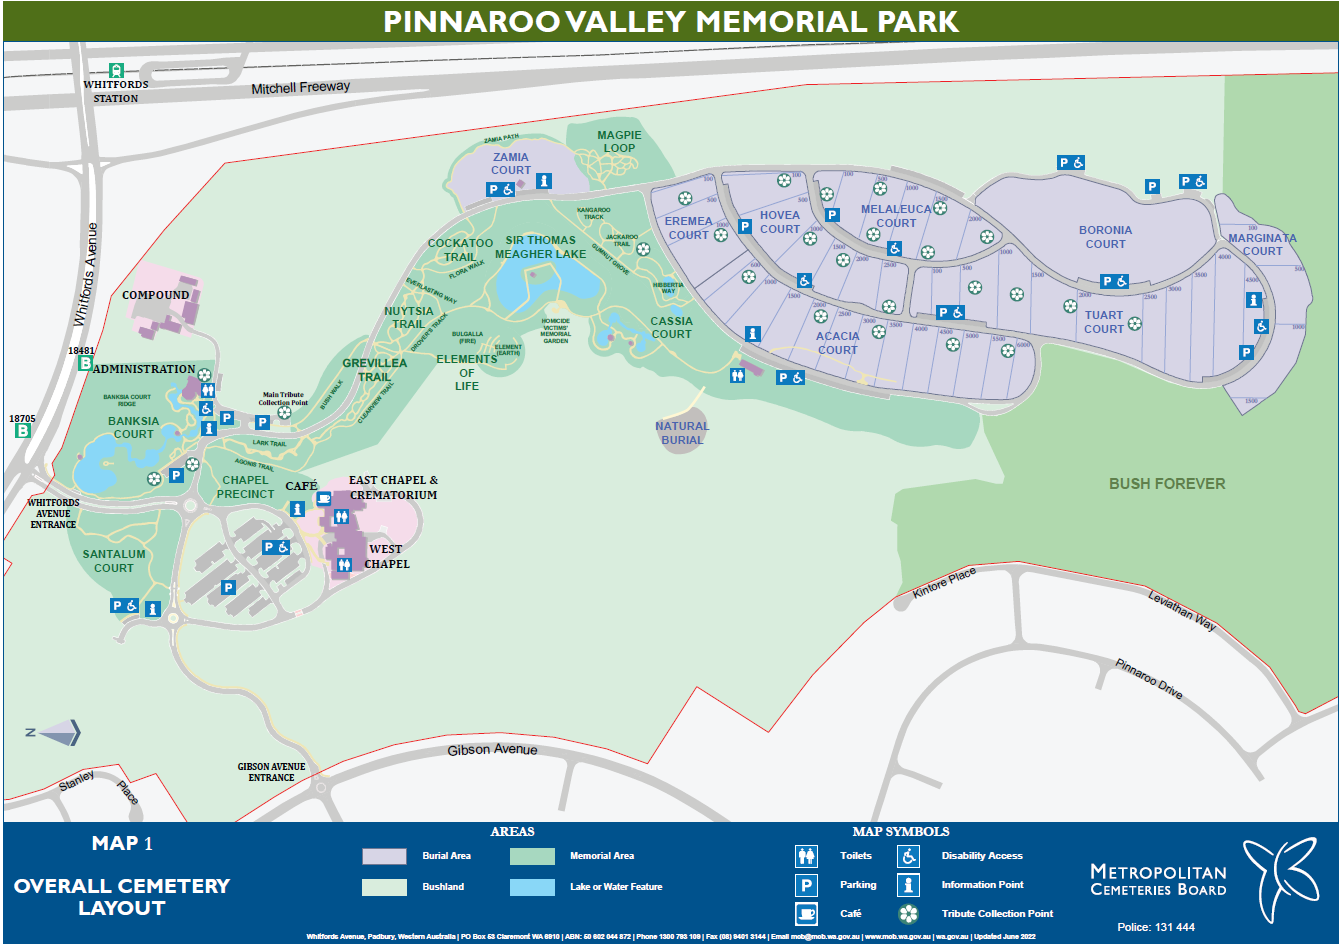 Pinnaroo Valley Memorial Park overall layout showing all sections of the park